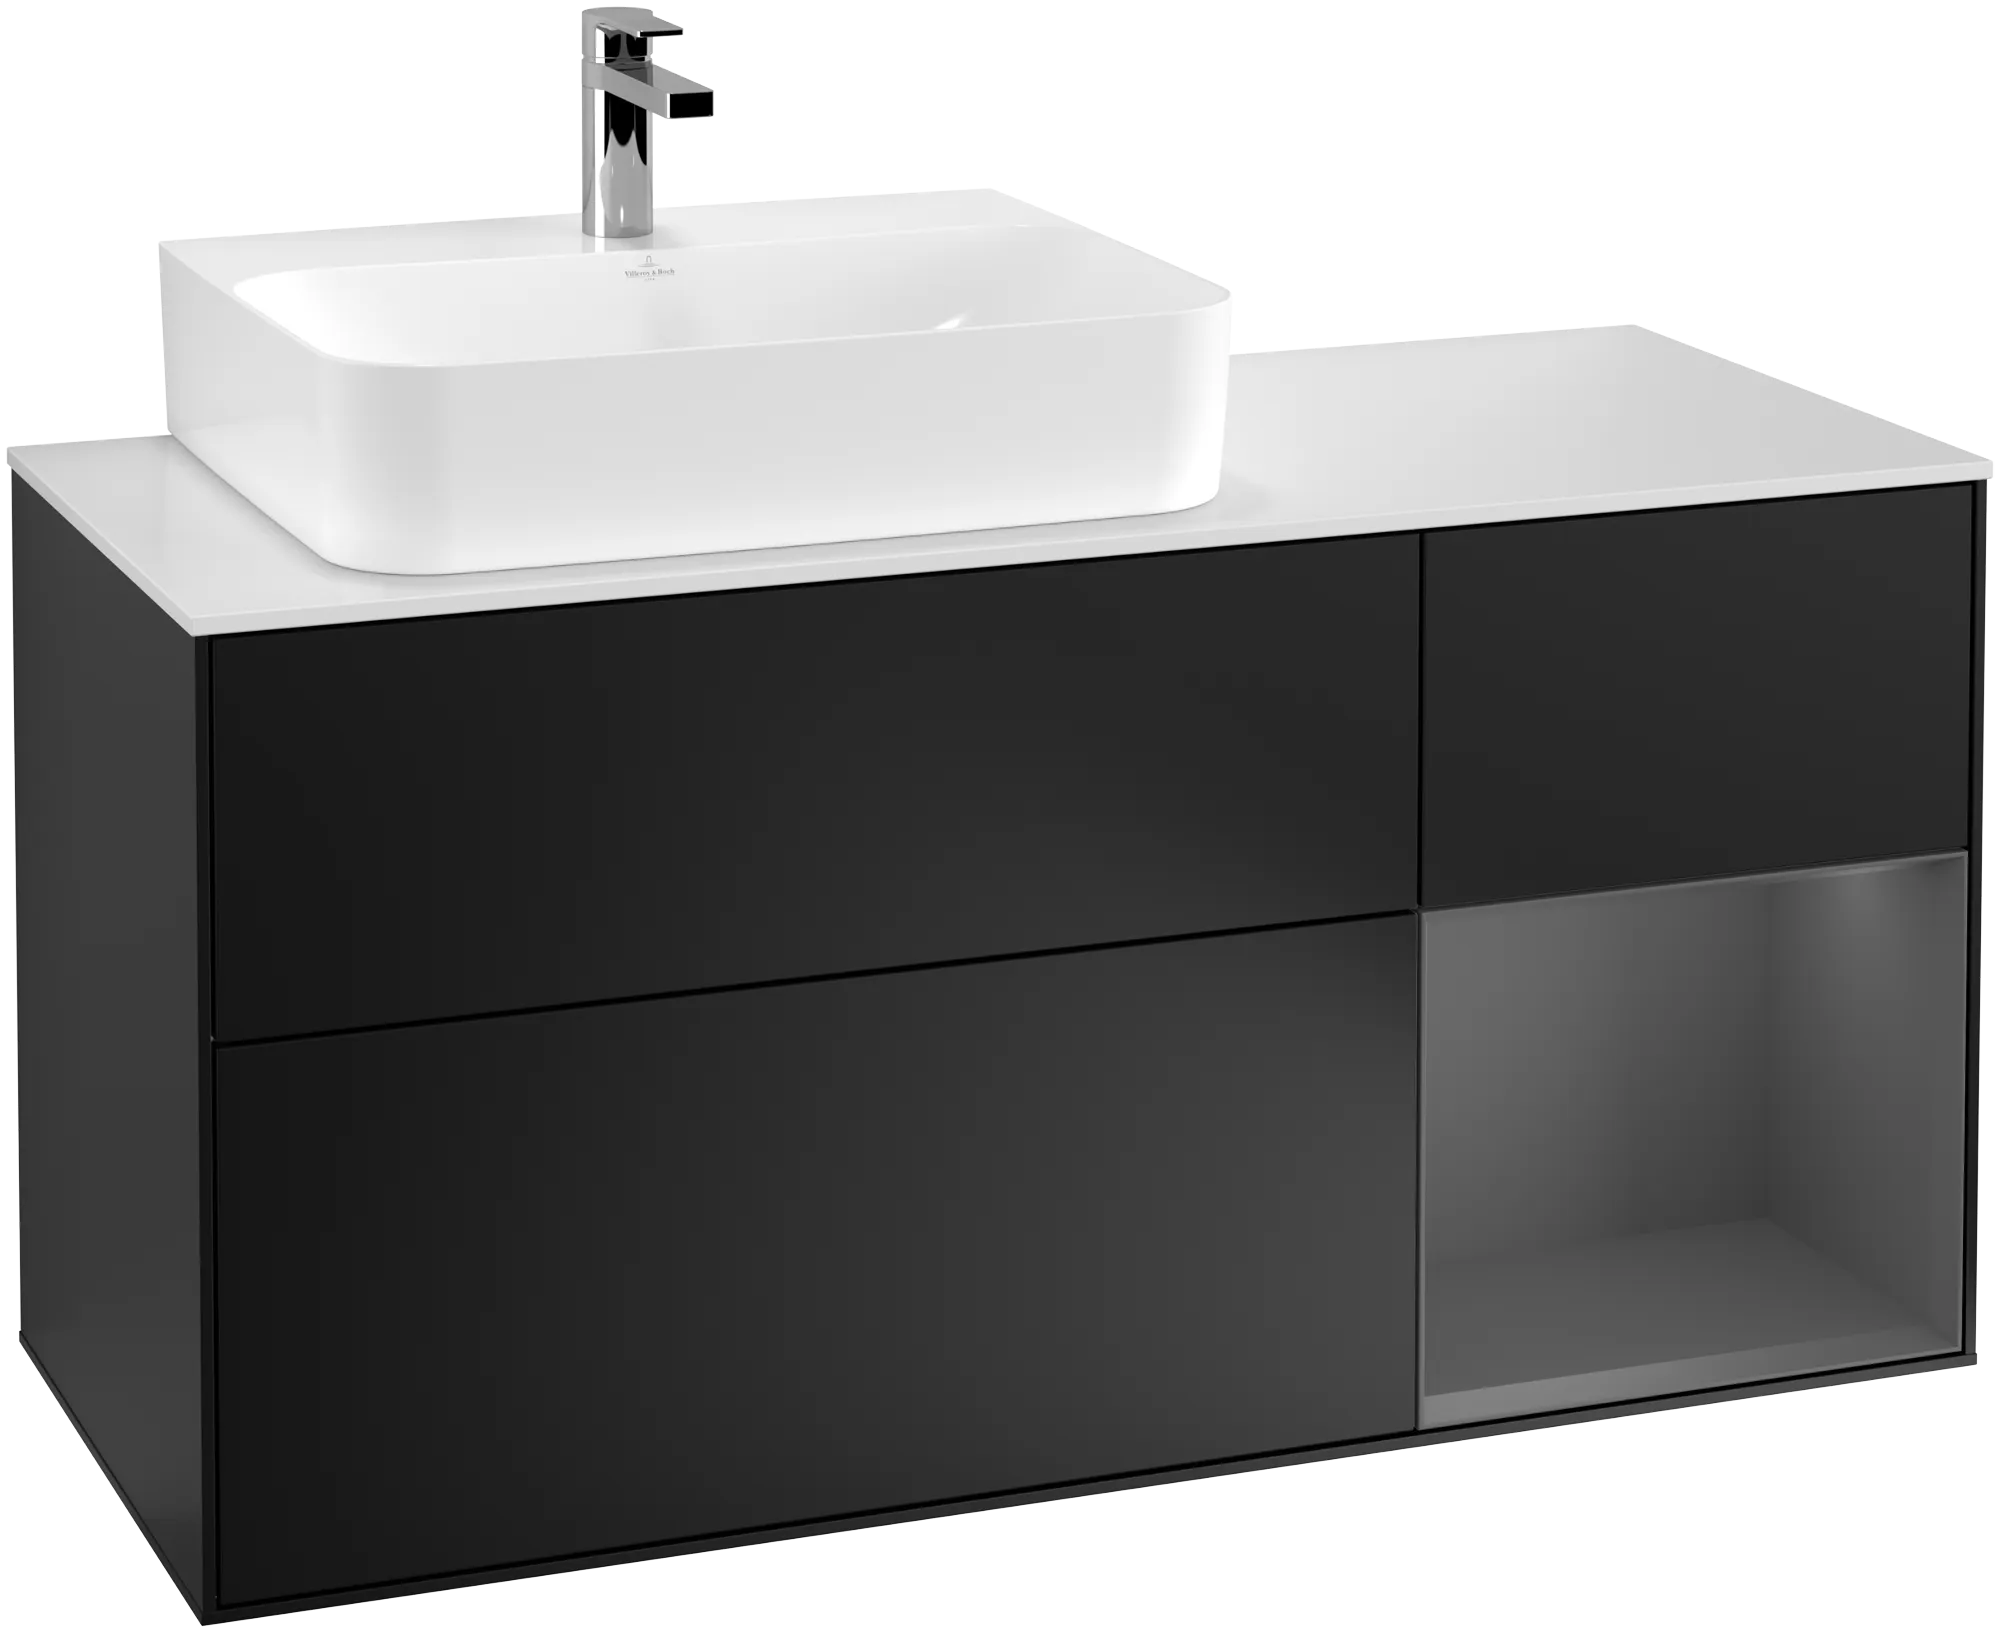 Picture of VILLEROY BOCH Finion Vanity unit, with lighting, 3 pull-out compartments, 1200 x 603 x 501 mm, Black Matt Lacquer / Anthracite Matt Lacquer / Glass White Matt #G151GKPD